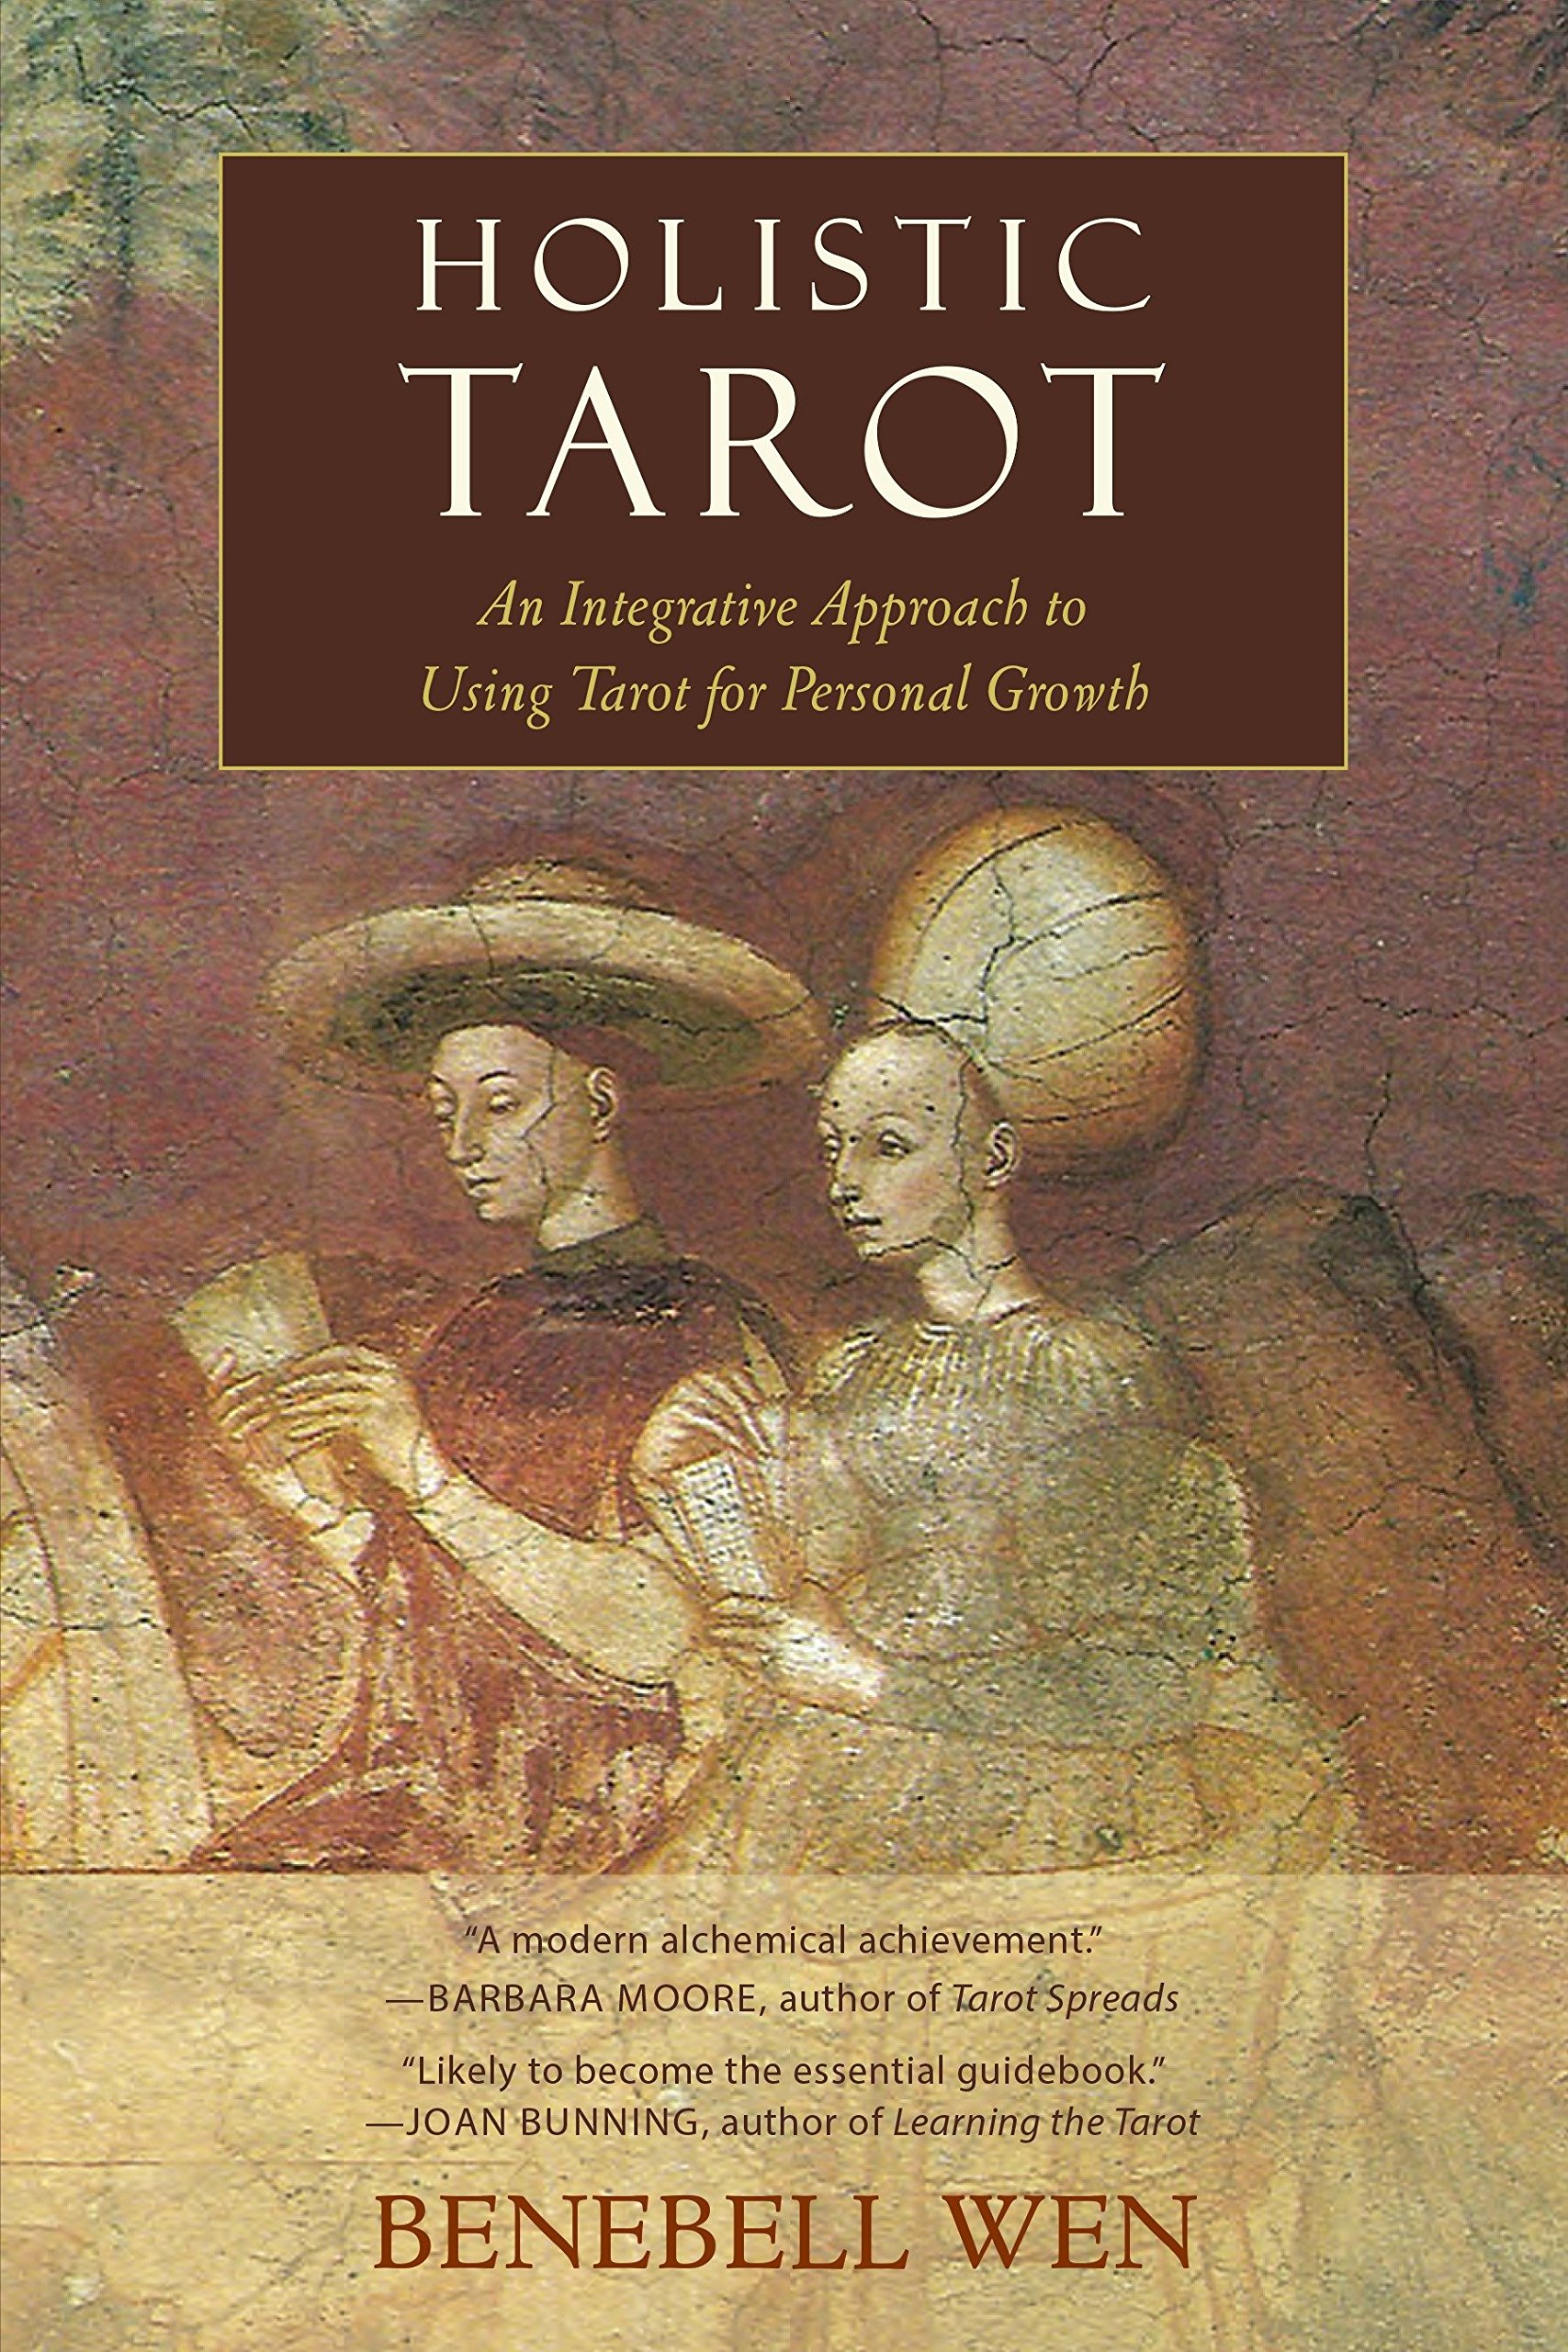 Holistic Tarot : An Integrative Approach to Using Tarot for Personal Growth [Paperback]